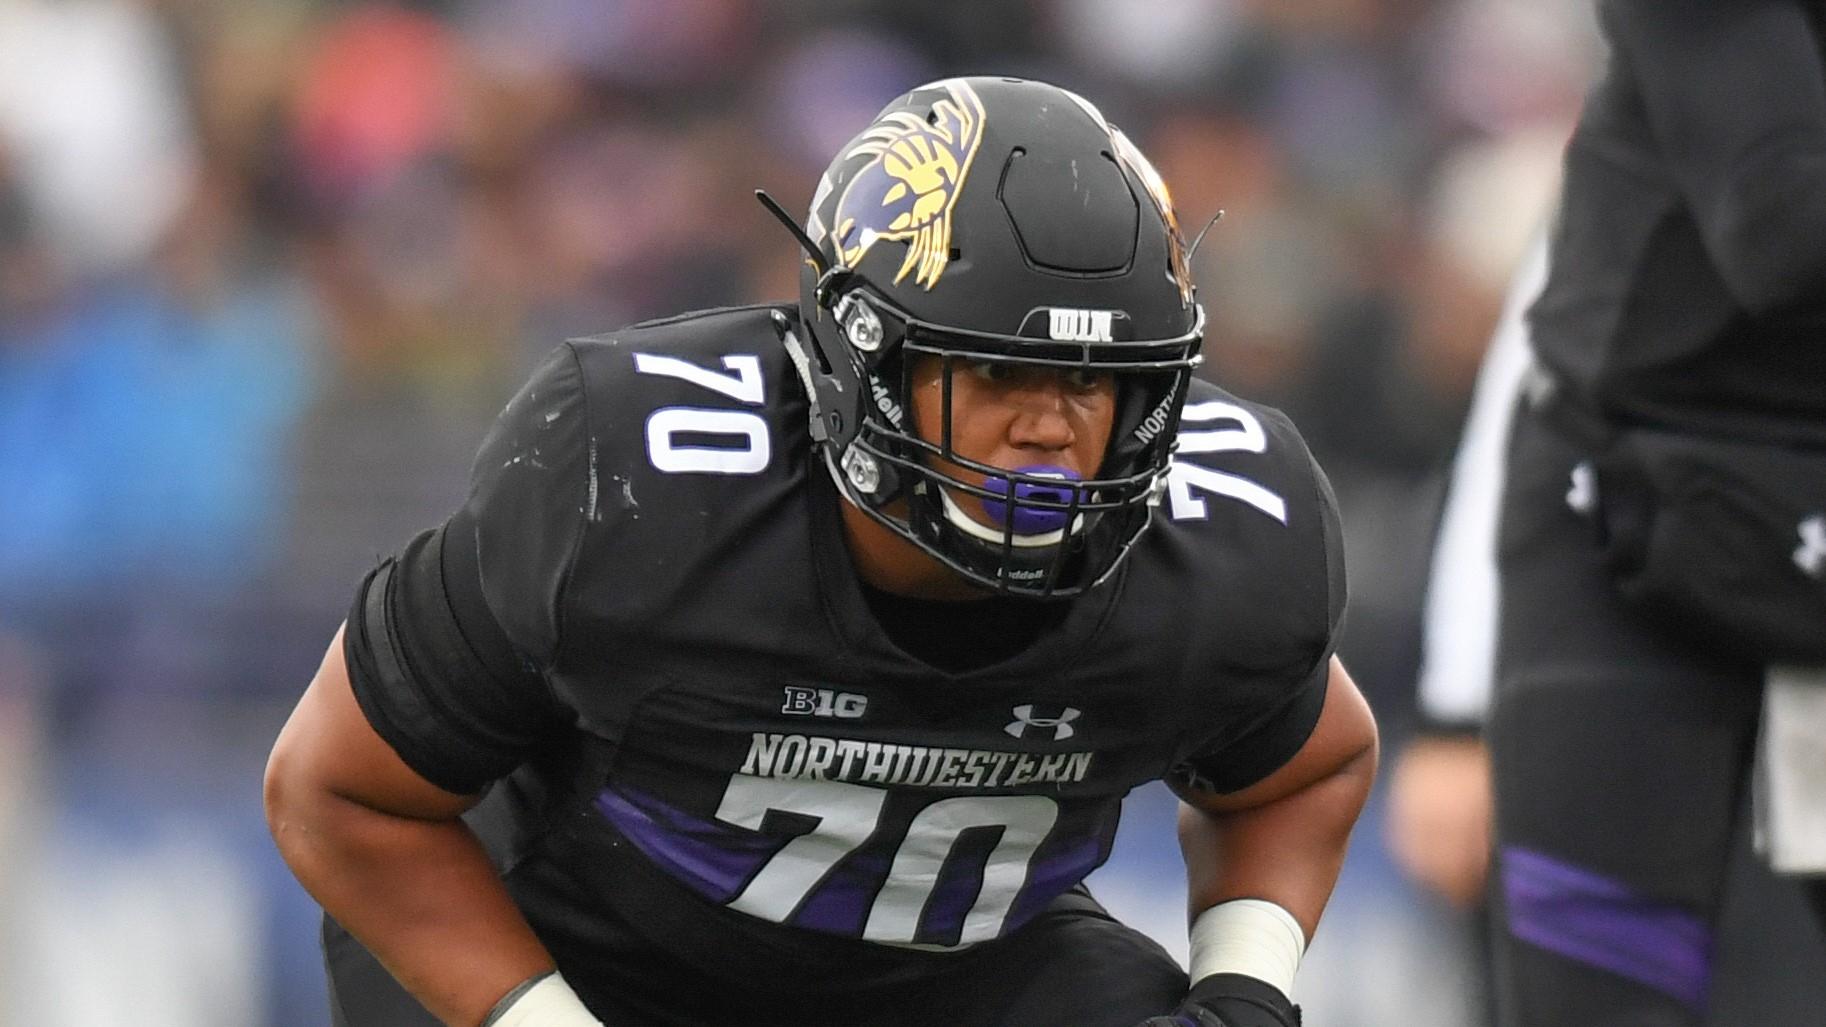 Northwestern Wildcats offensive lineman Rashawn Slater (70) in action during a game against the Michigan State Spartans at Ryan Field. / Patrick Gorski-USA TODAY Sports